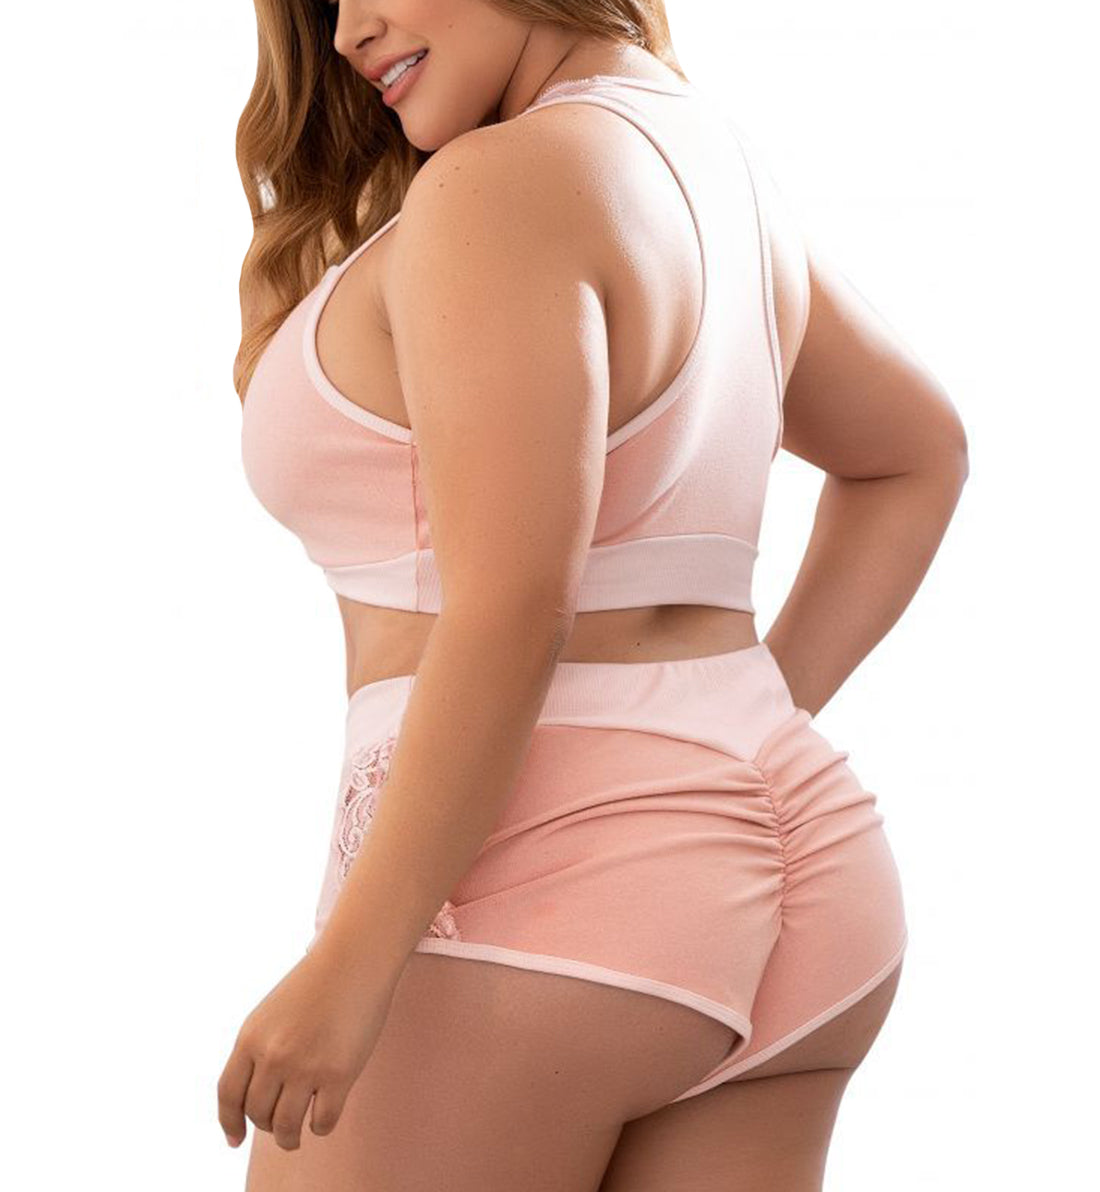 Mapale Racer Crop Top &amp; Cheeky Short PLUS size (7389X),1X/2X,Rose - Rose,1X/2X